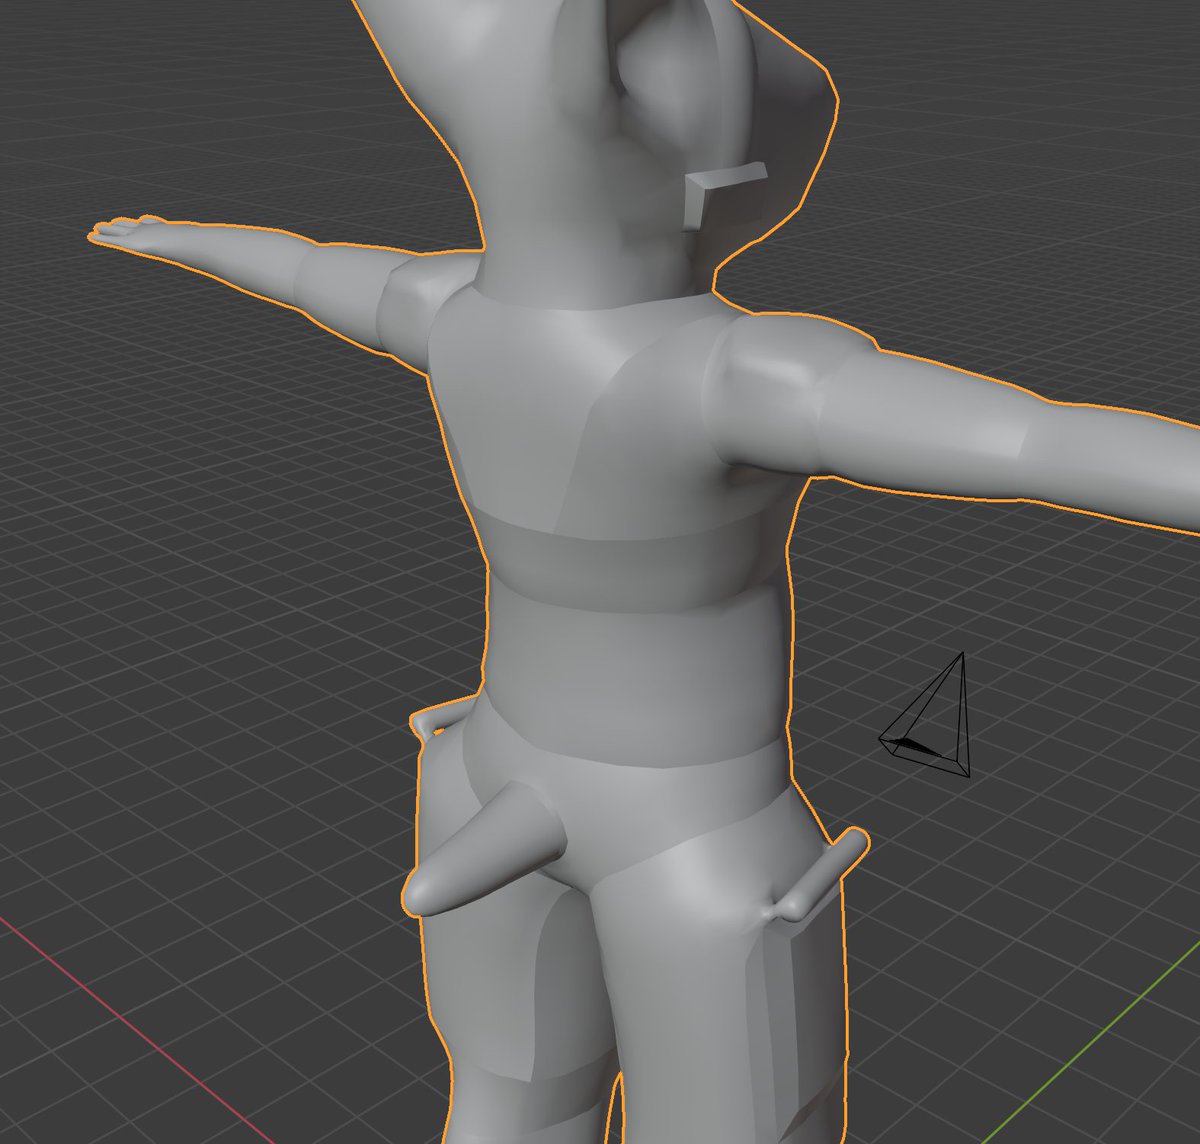 Finally, after days of continuous work, we have the final mesh of Wiz. He is done. Now I need to figure out how to unfold him so I can paint him... for real